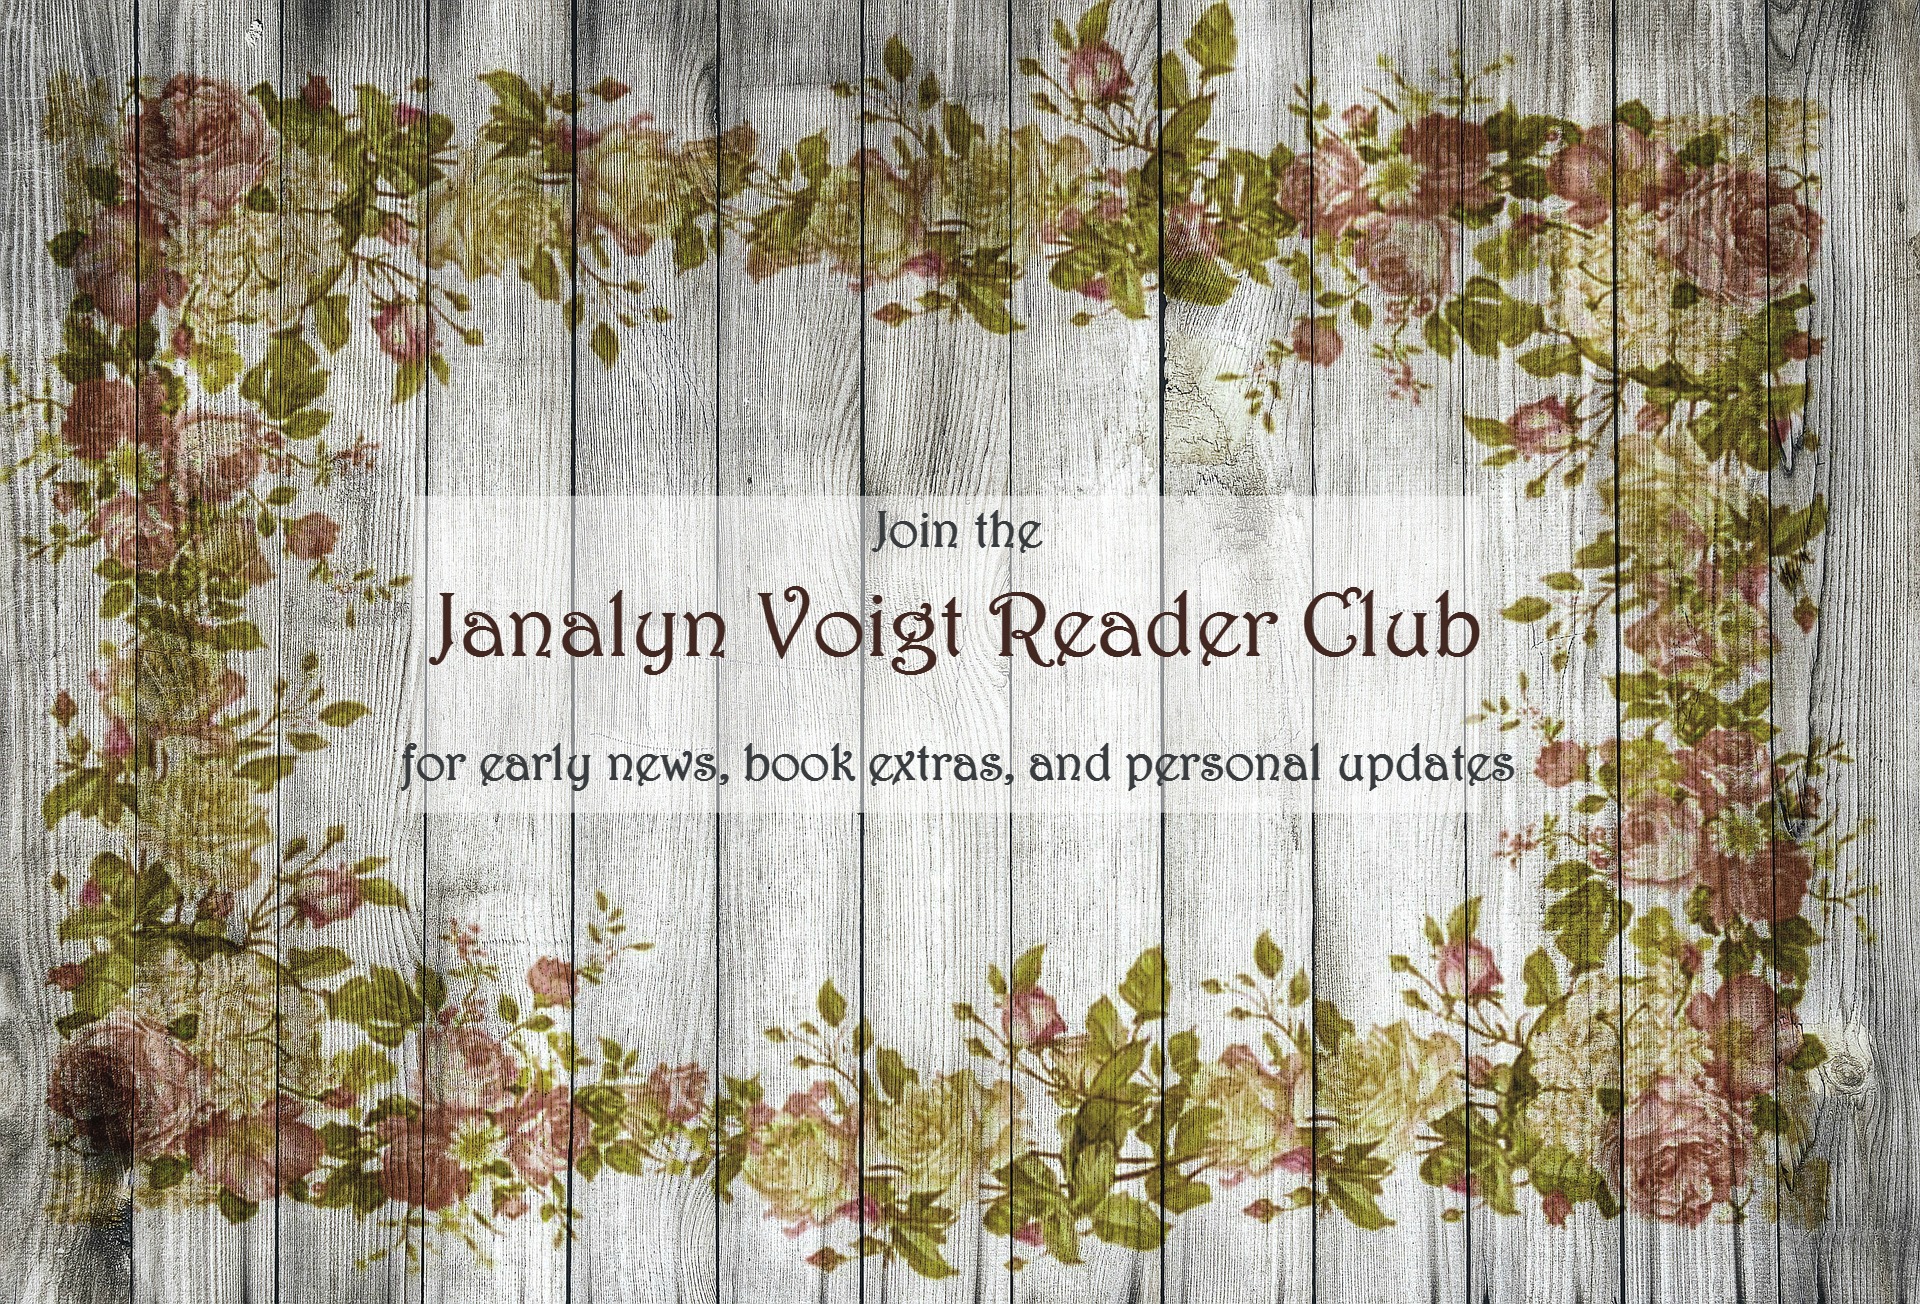 Join the Janalyn Voigt Reader Club